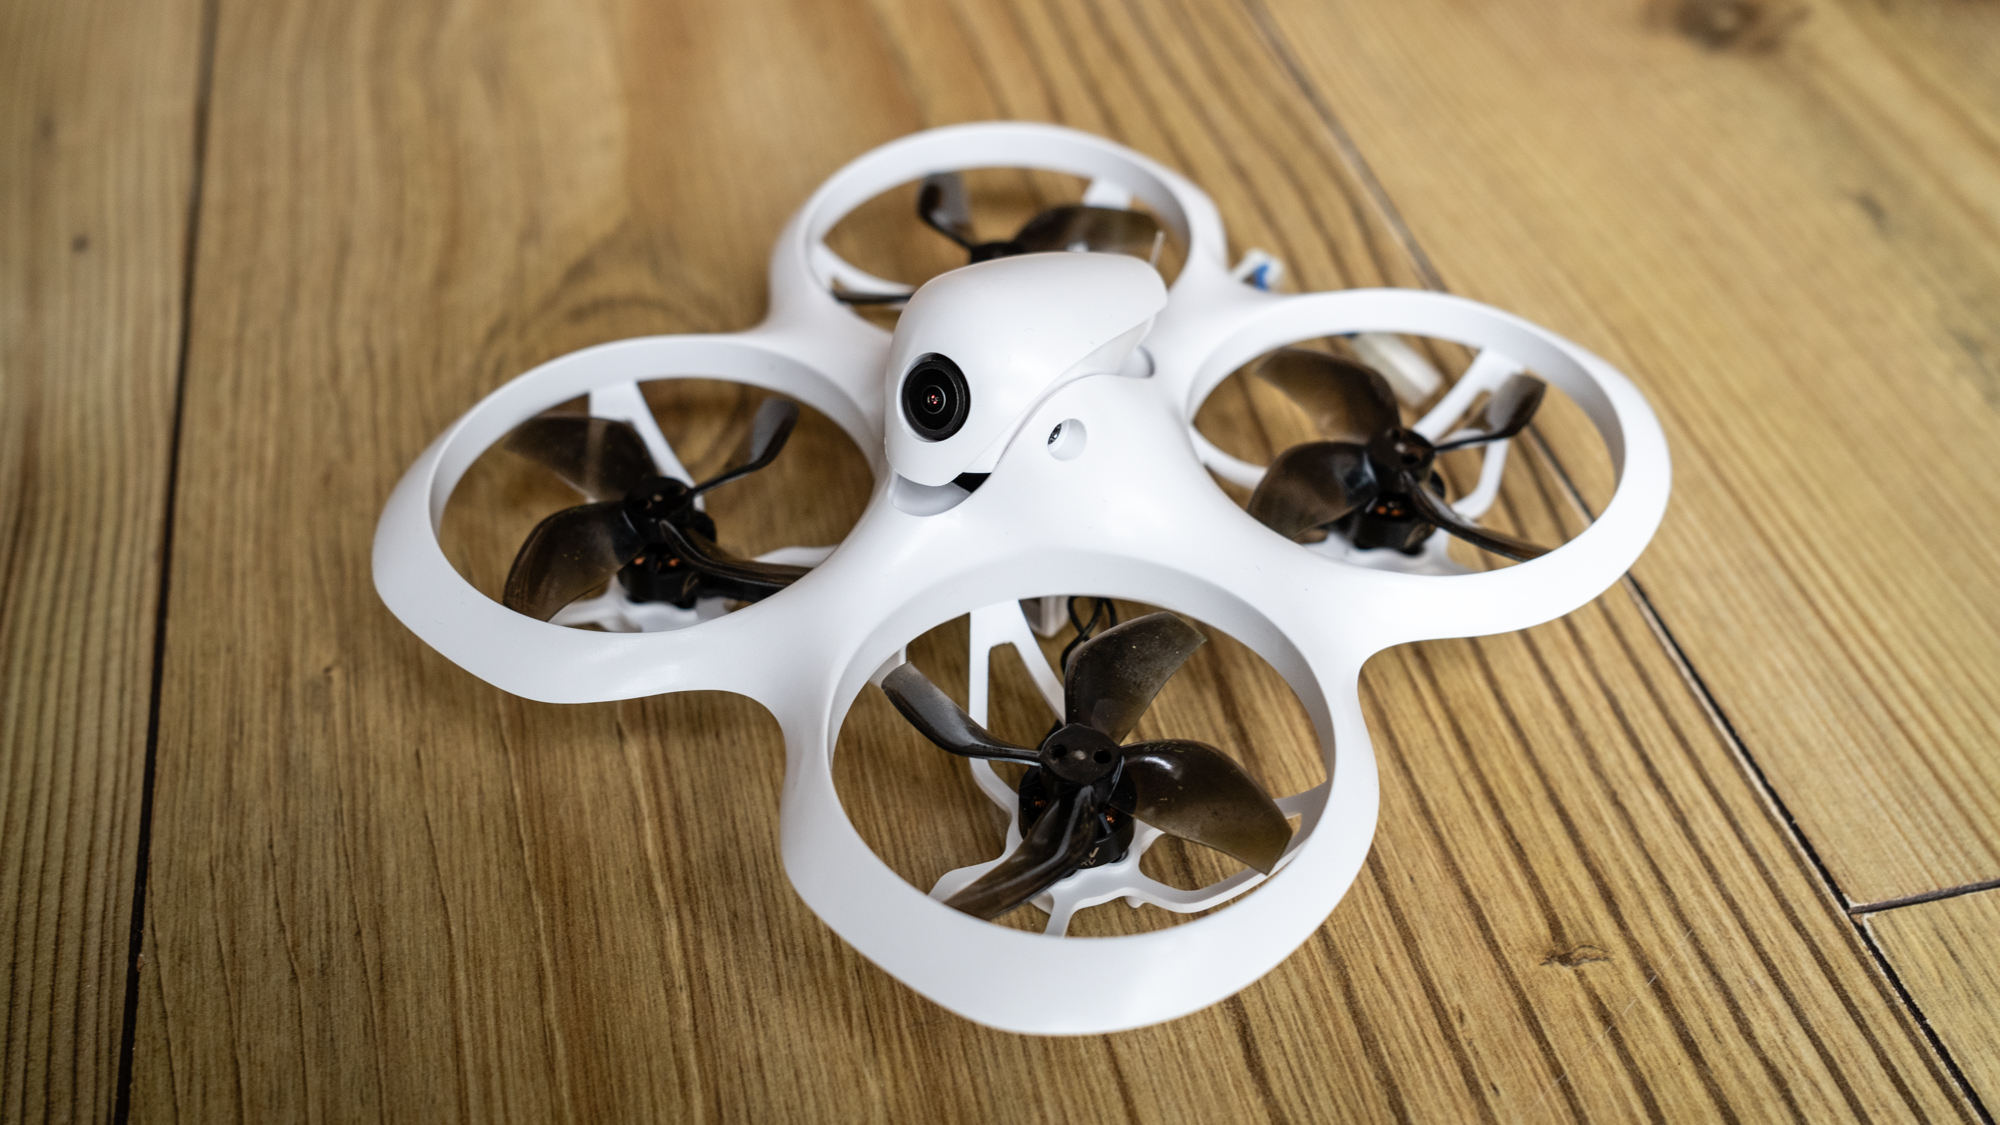 BetaFPV Cetus X review — An exceptional FPV drone for beginners